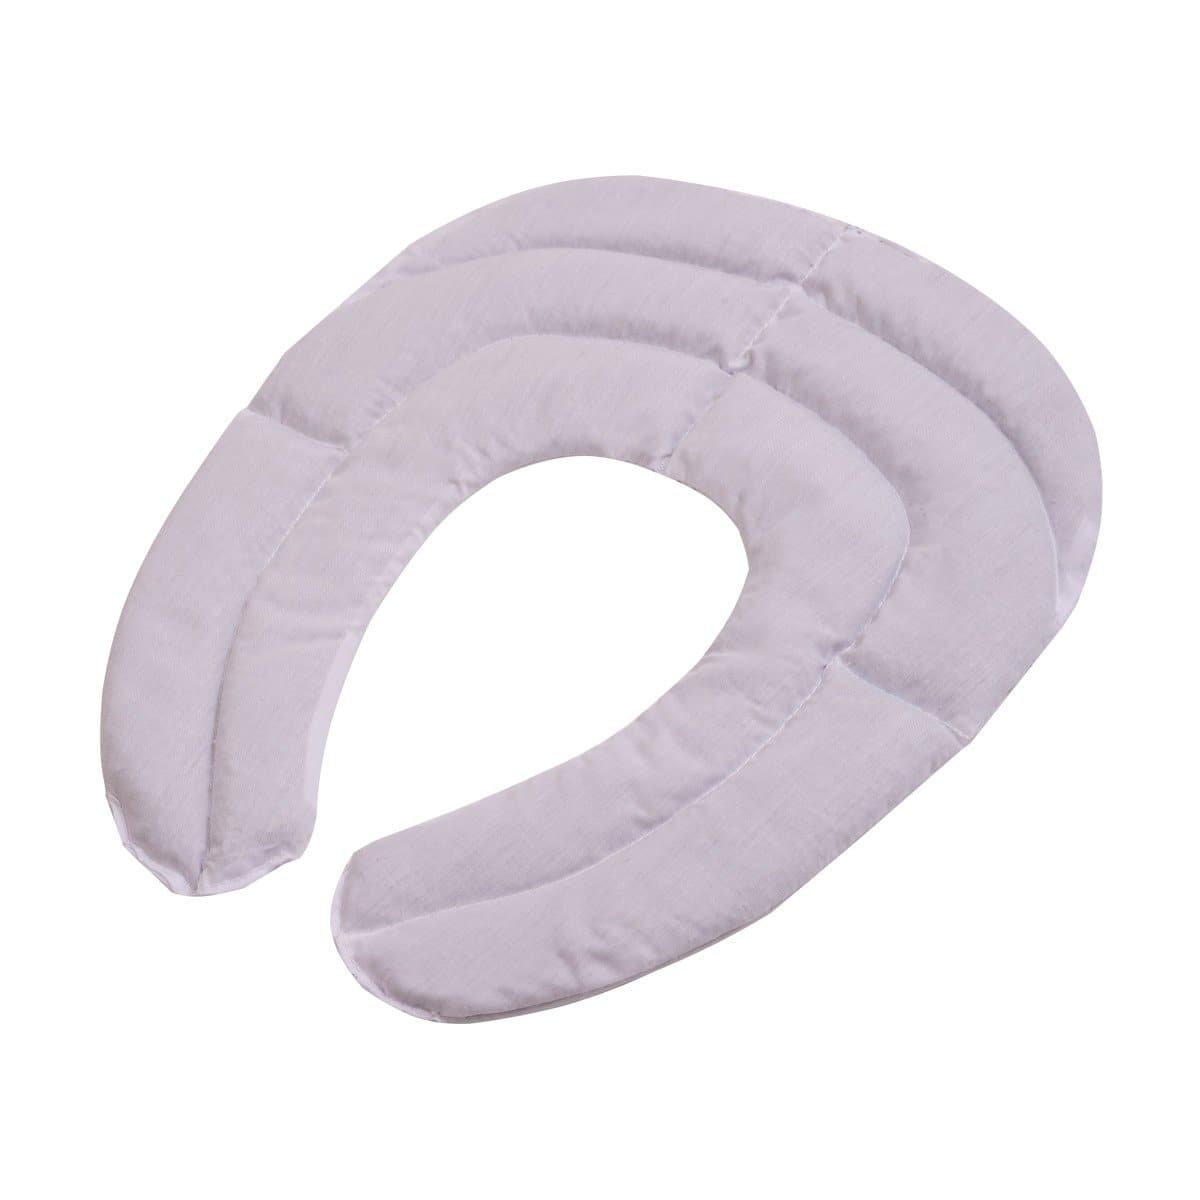 Vivi Relax-a-Bac Neck Wrap - Hot & Cold Therapy Beaded Neck Pad - Senior.com Hot/Cold Therapy Pack